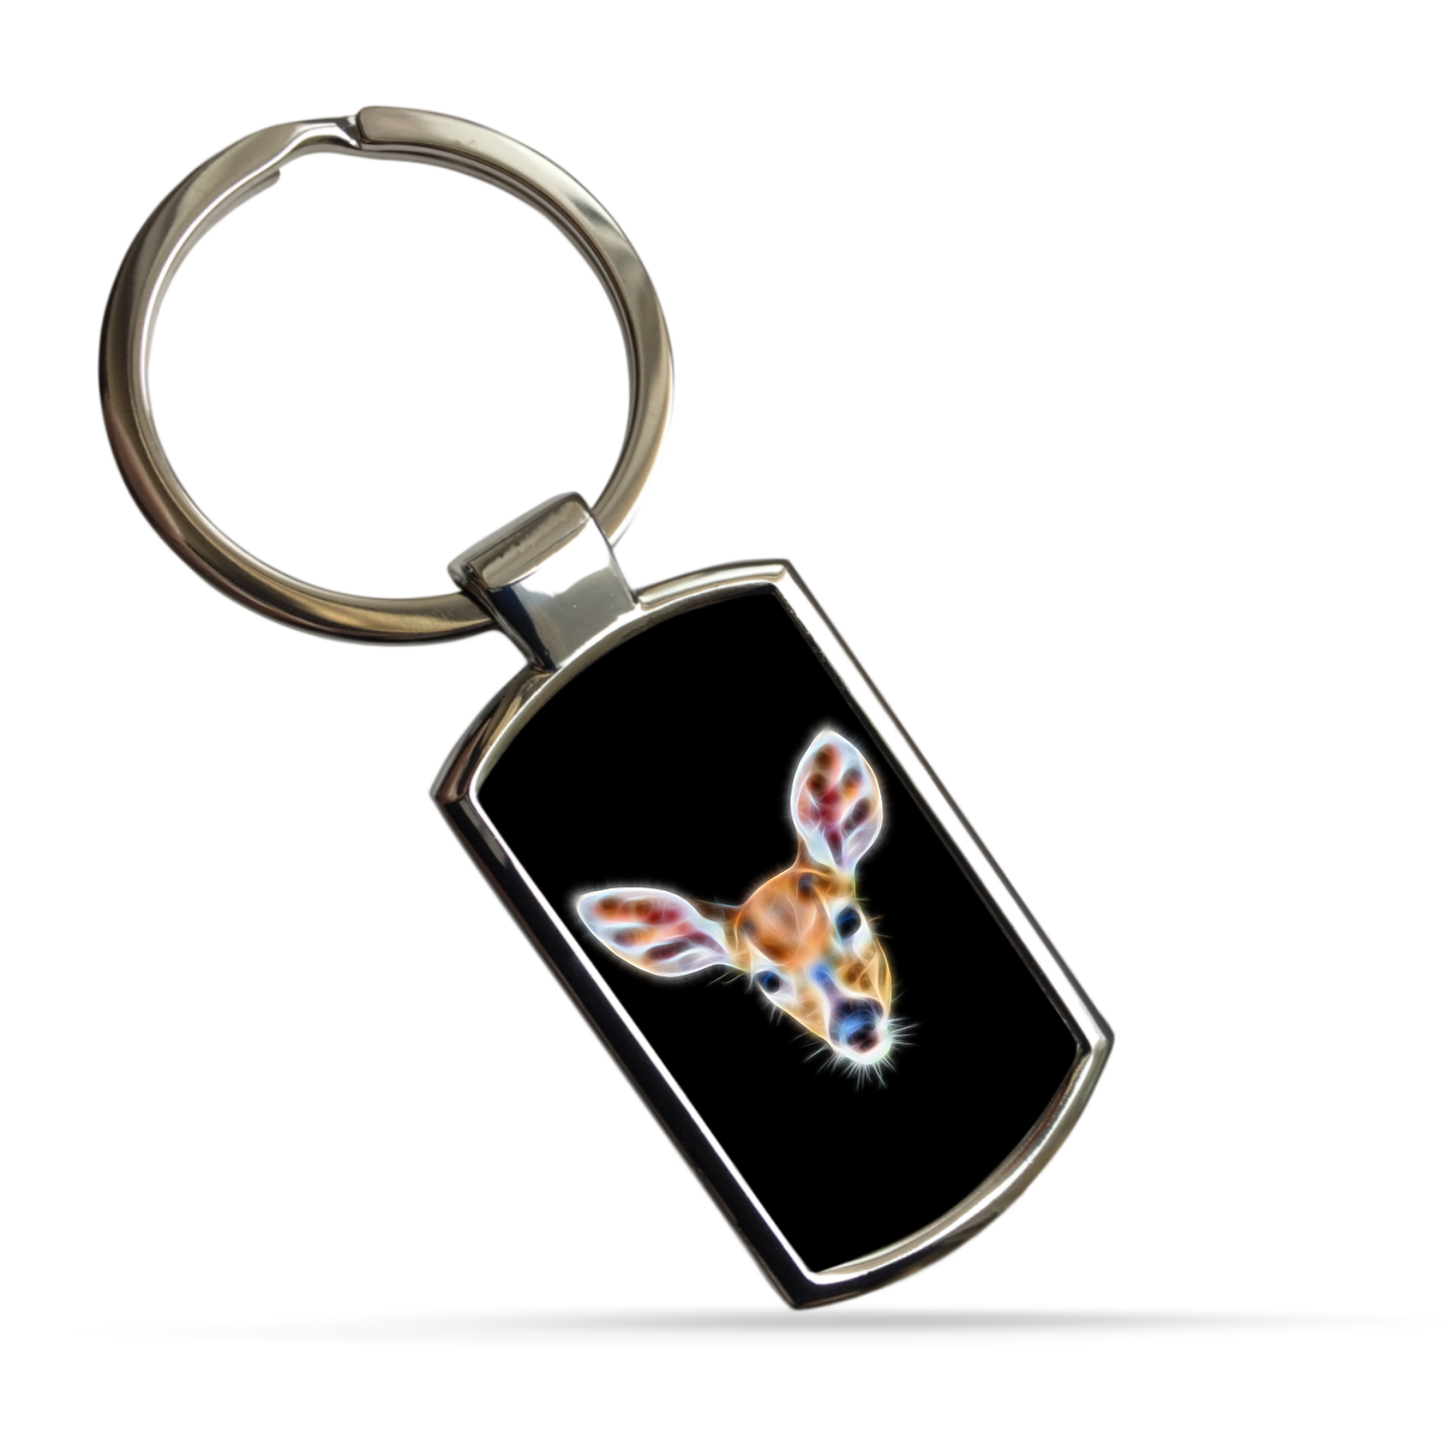 Deer Keychain with Beautiful and Stunning Fractal Art Design